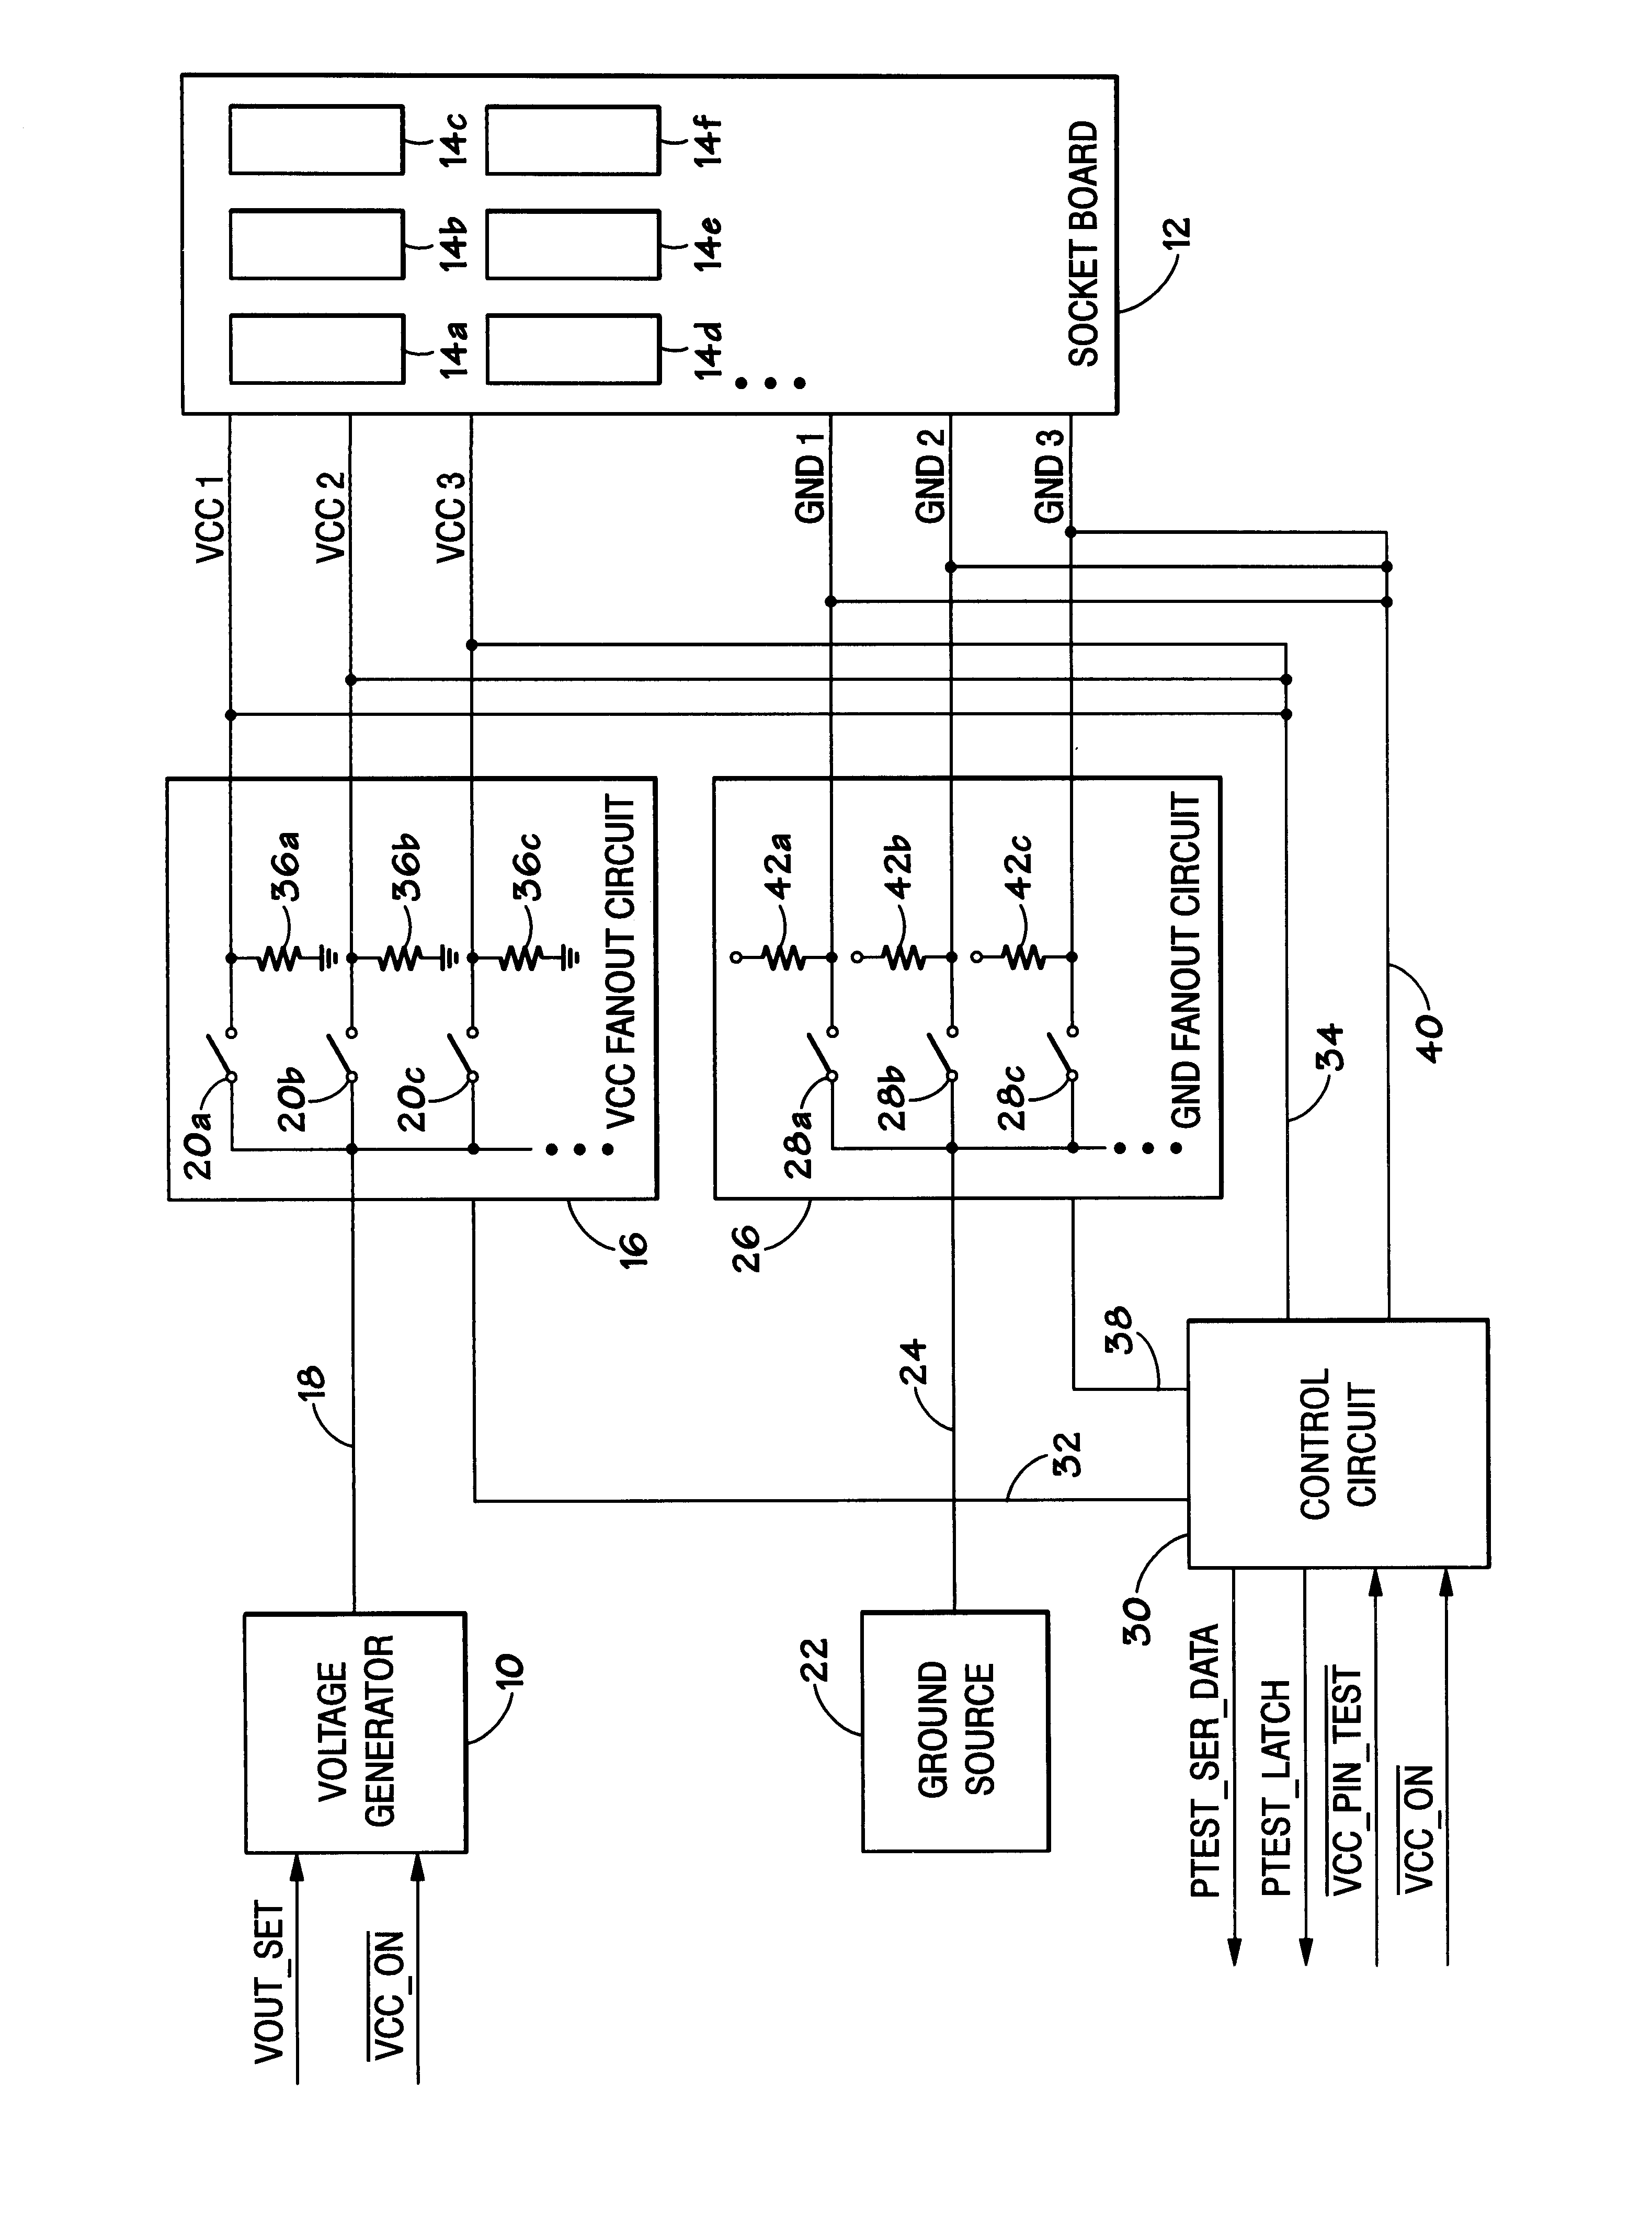 Method and apparatus of testing memory device power and ground pins in an array assembly platform